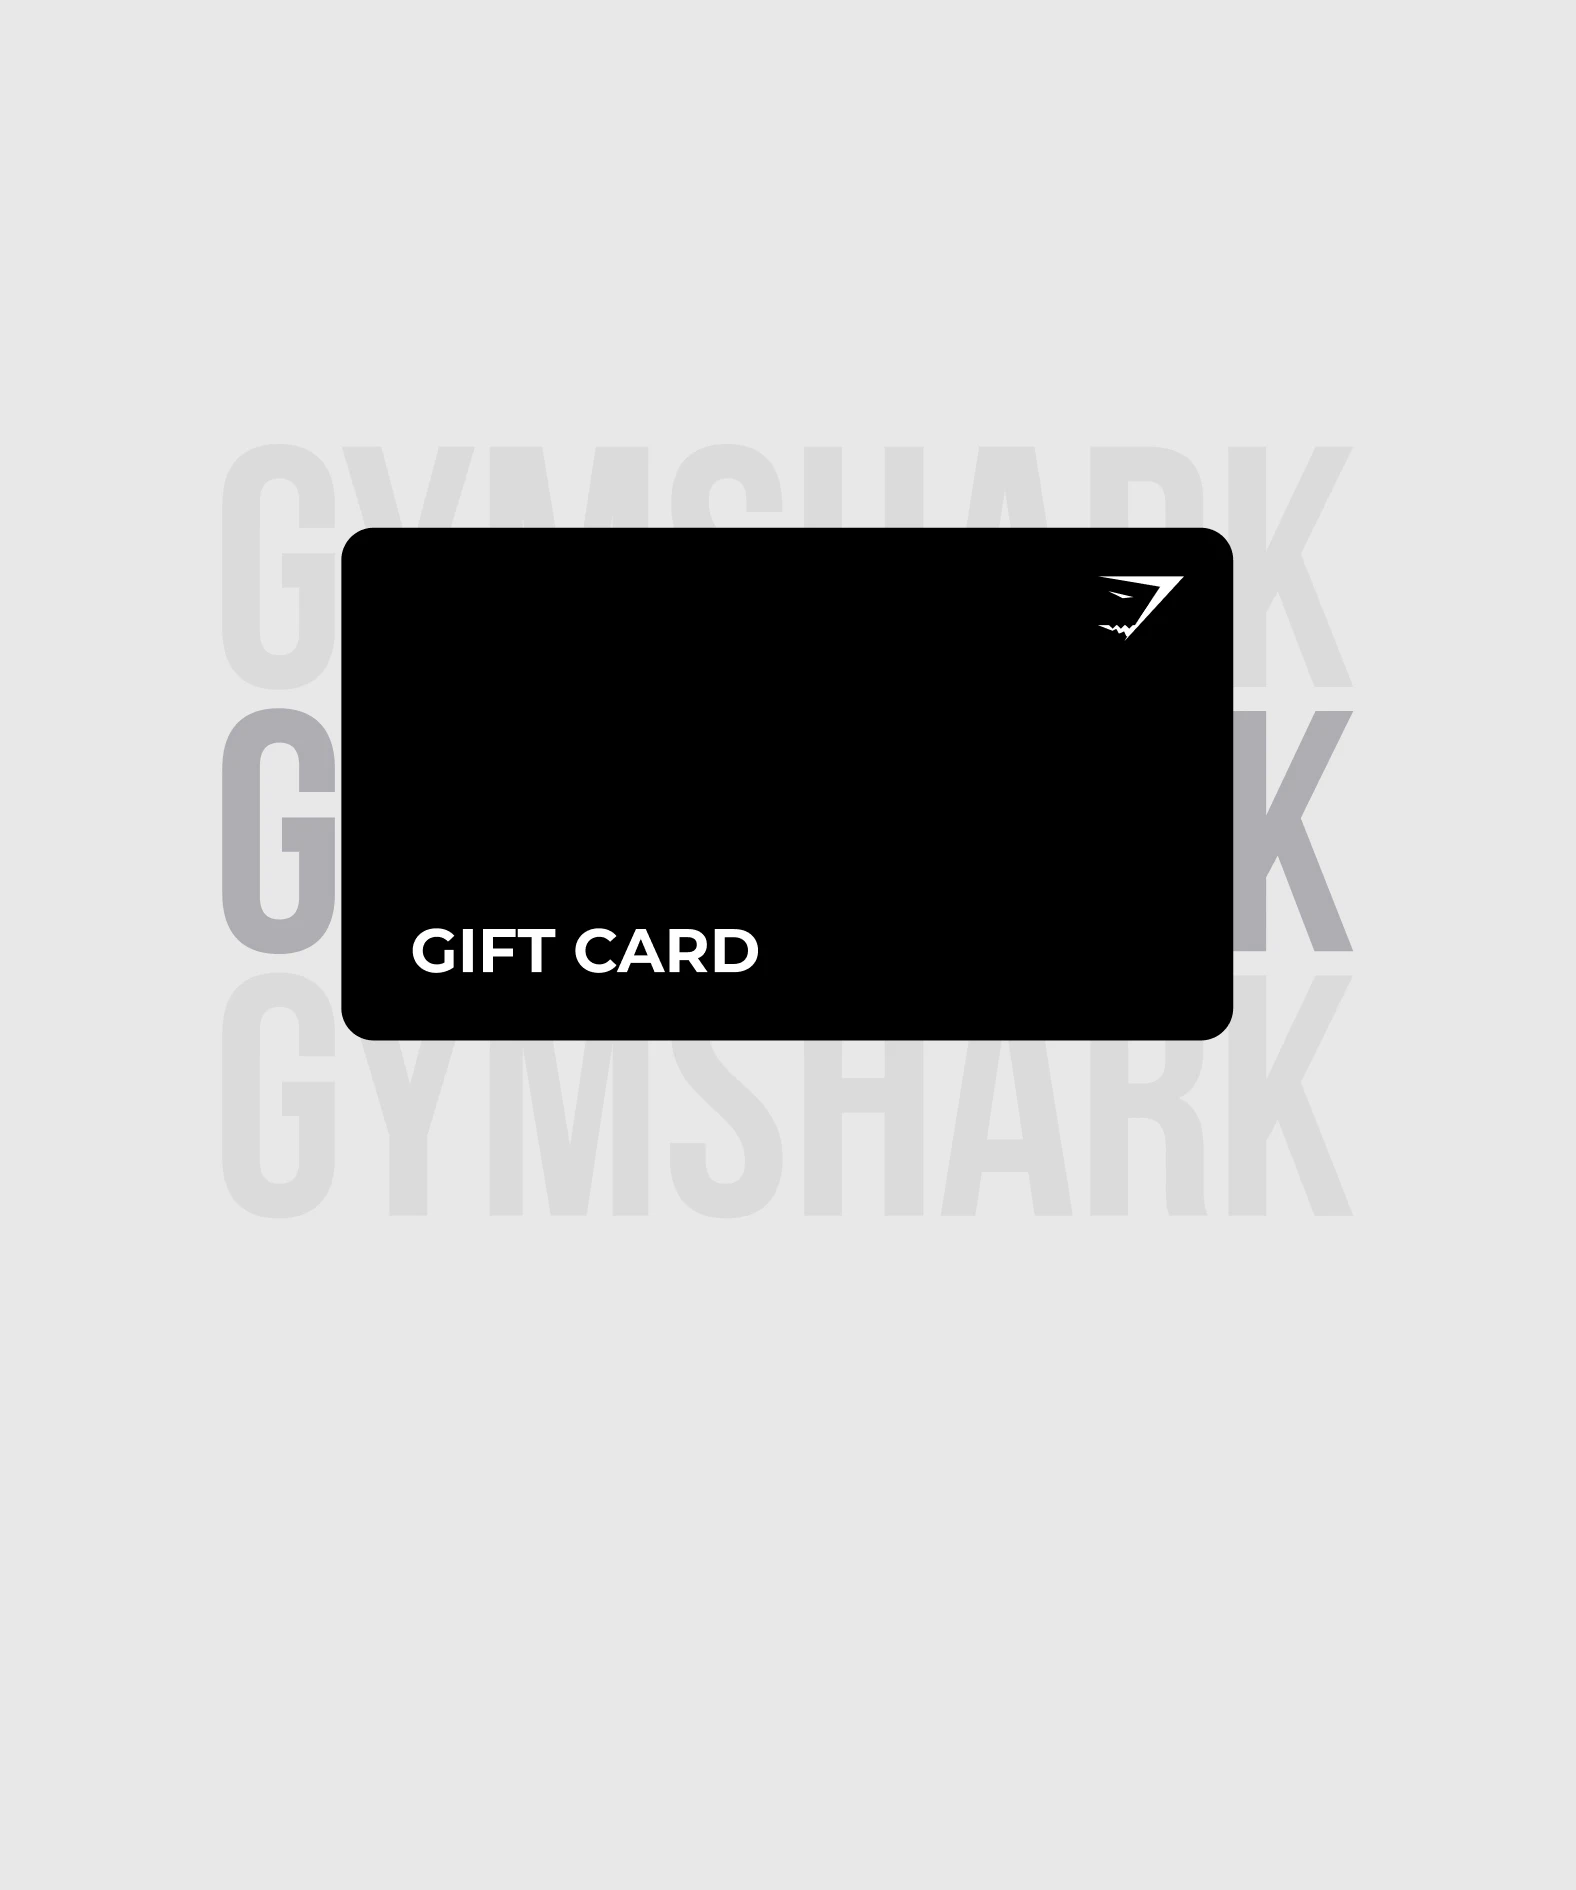 Gifts for Weightlifters - Gift ideas for Men - Gymshark